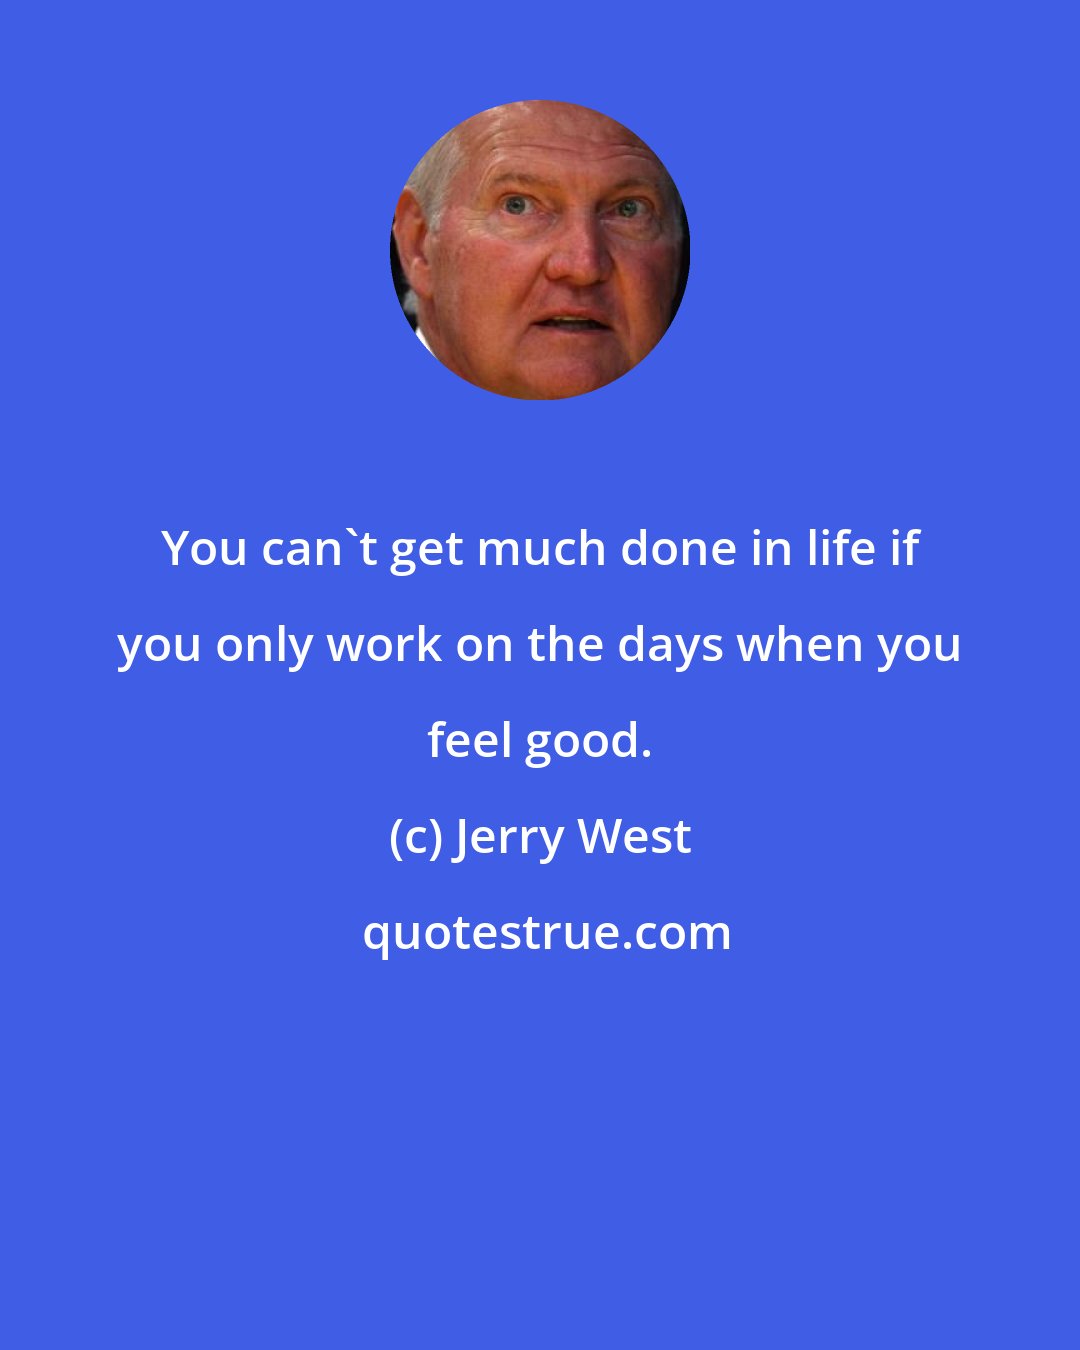 Jerry West: You can't get much done in life if you only work on the days when you feel good.